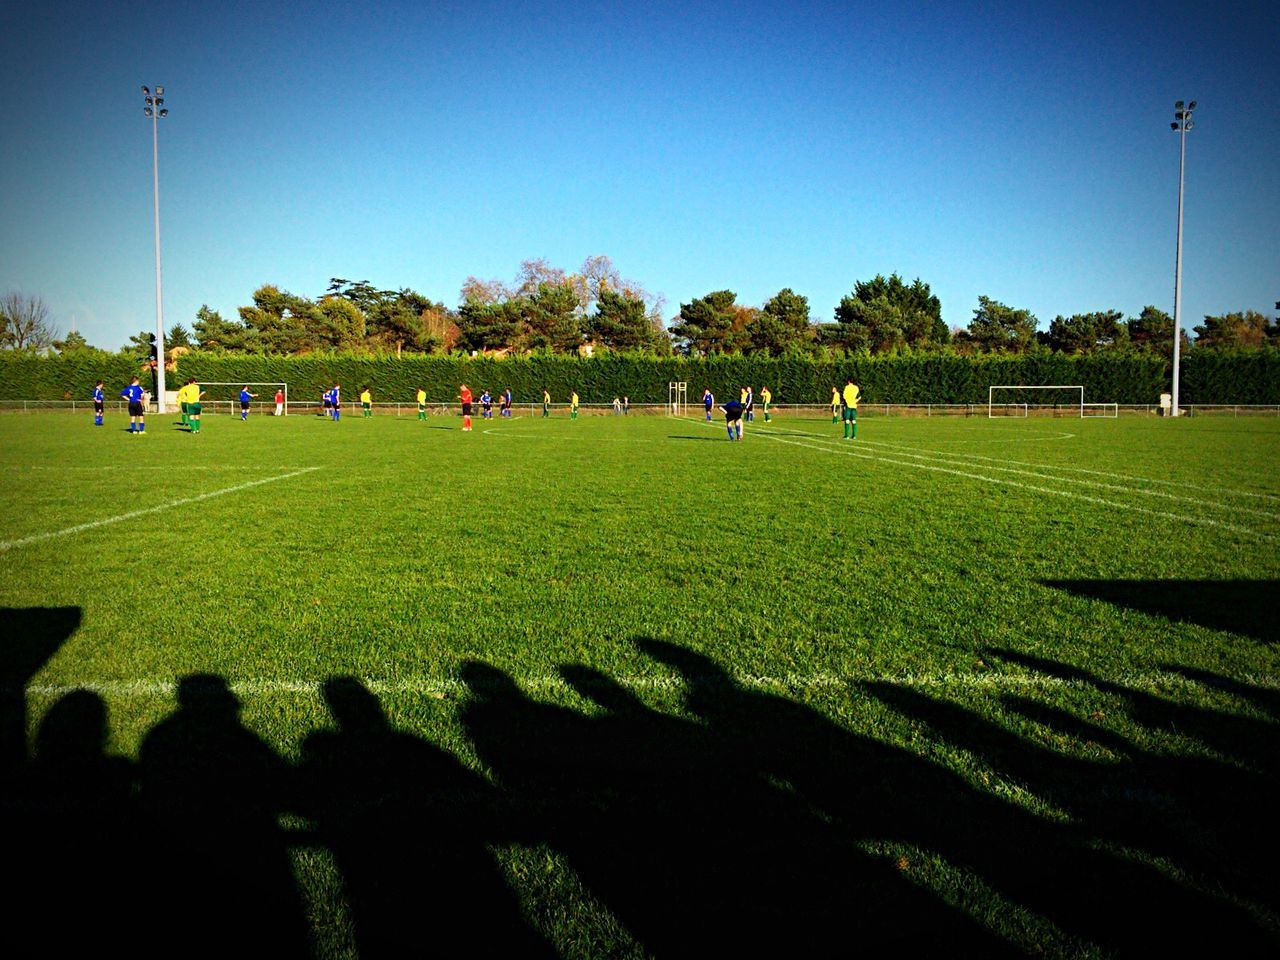 Shadow of spectators at soccer field